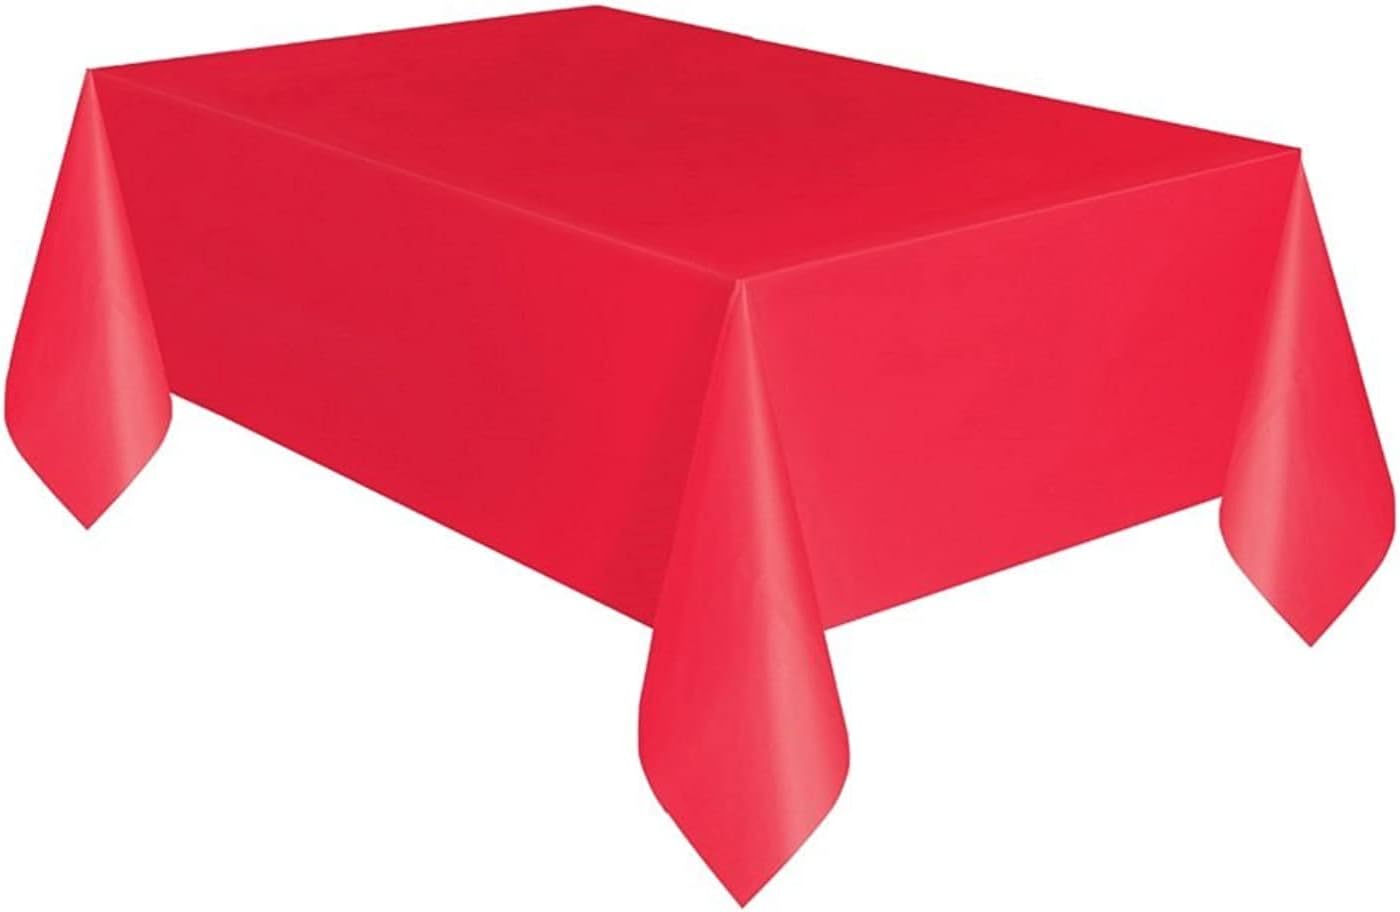 Red Solid Rectangular Plastic Table Cover  54